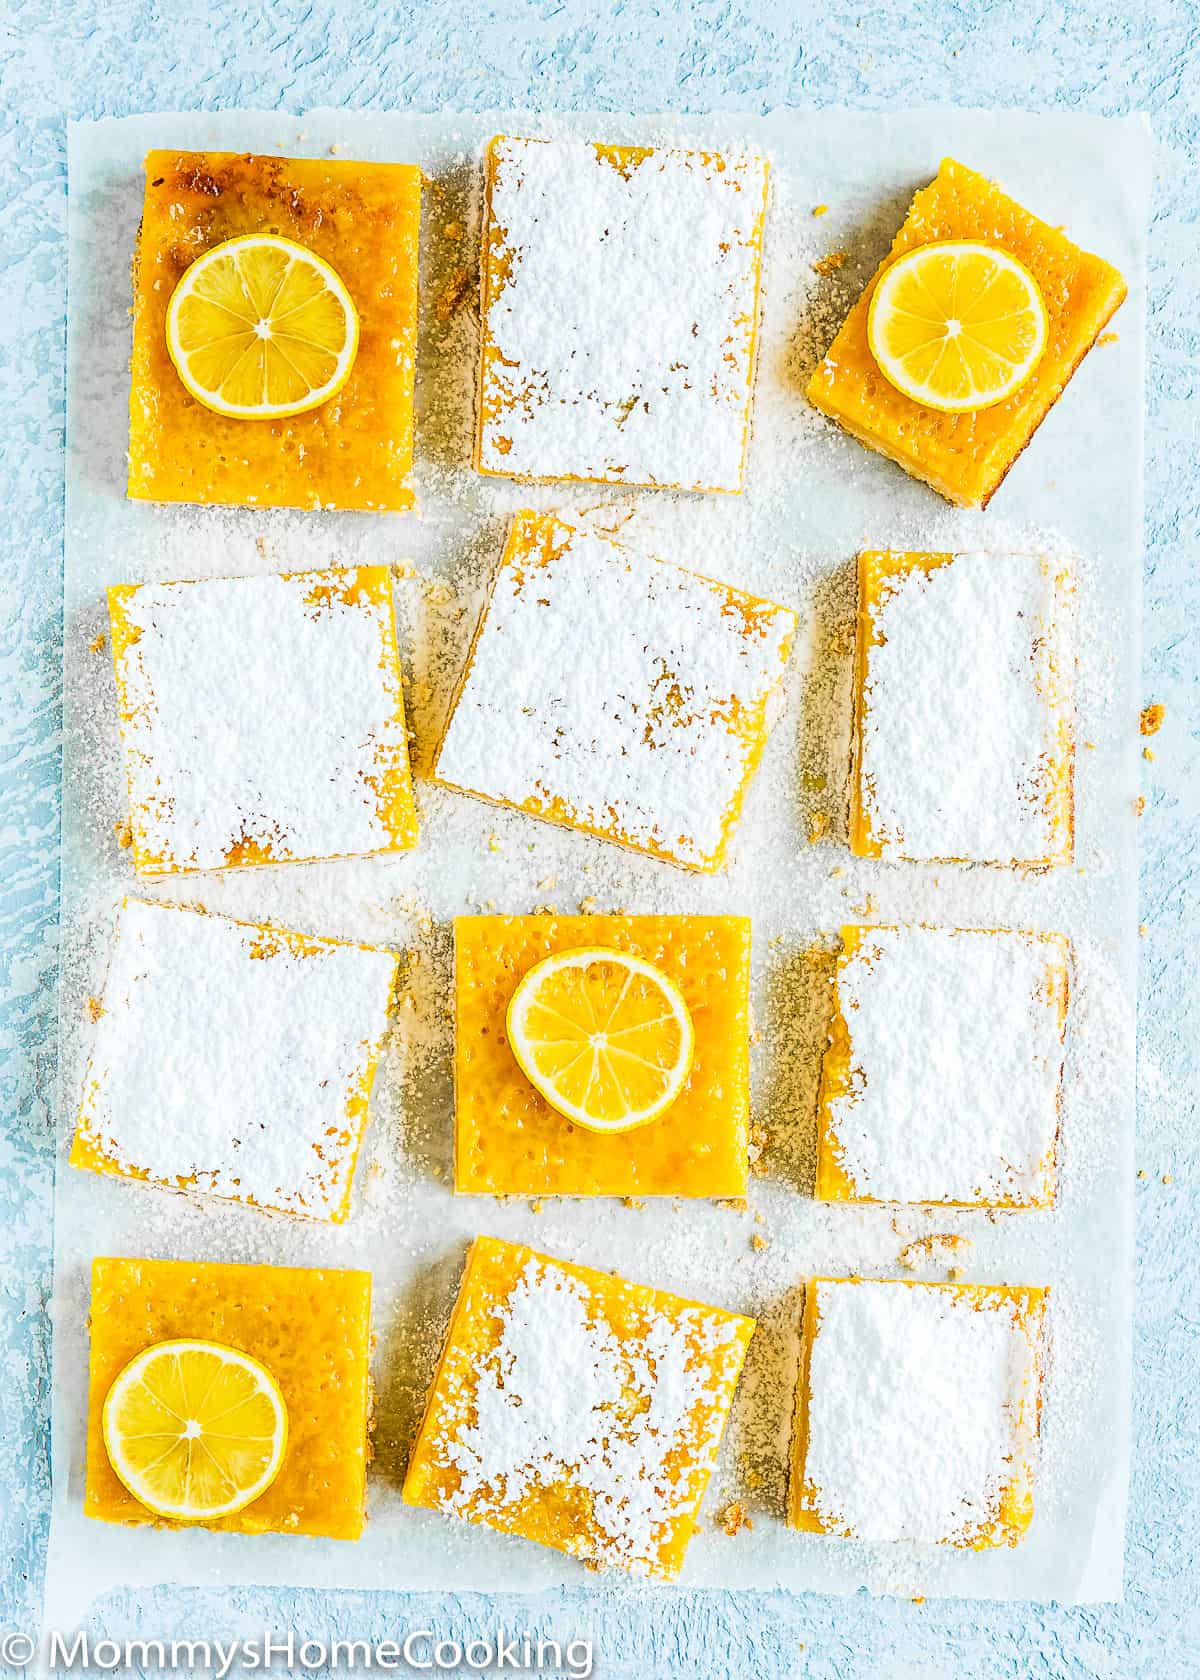 Eggless Lemon Bars with powdered sugar and lemon slices on top over a blue surface